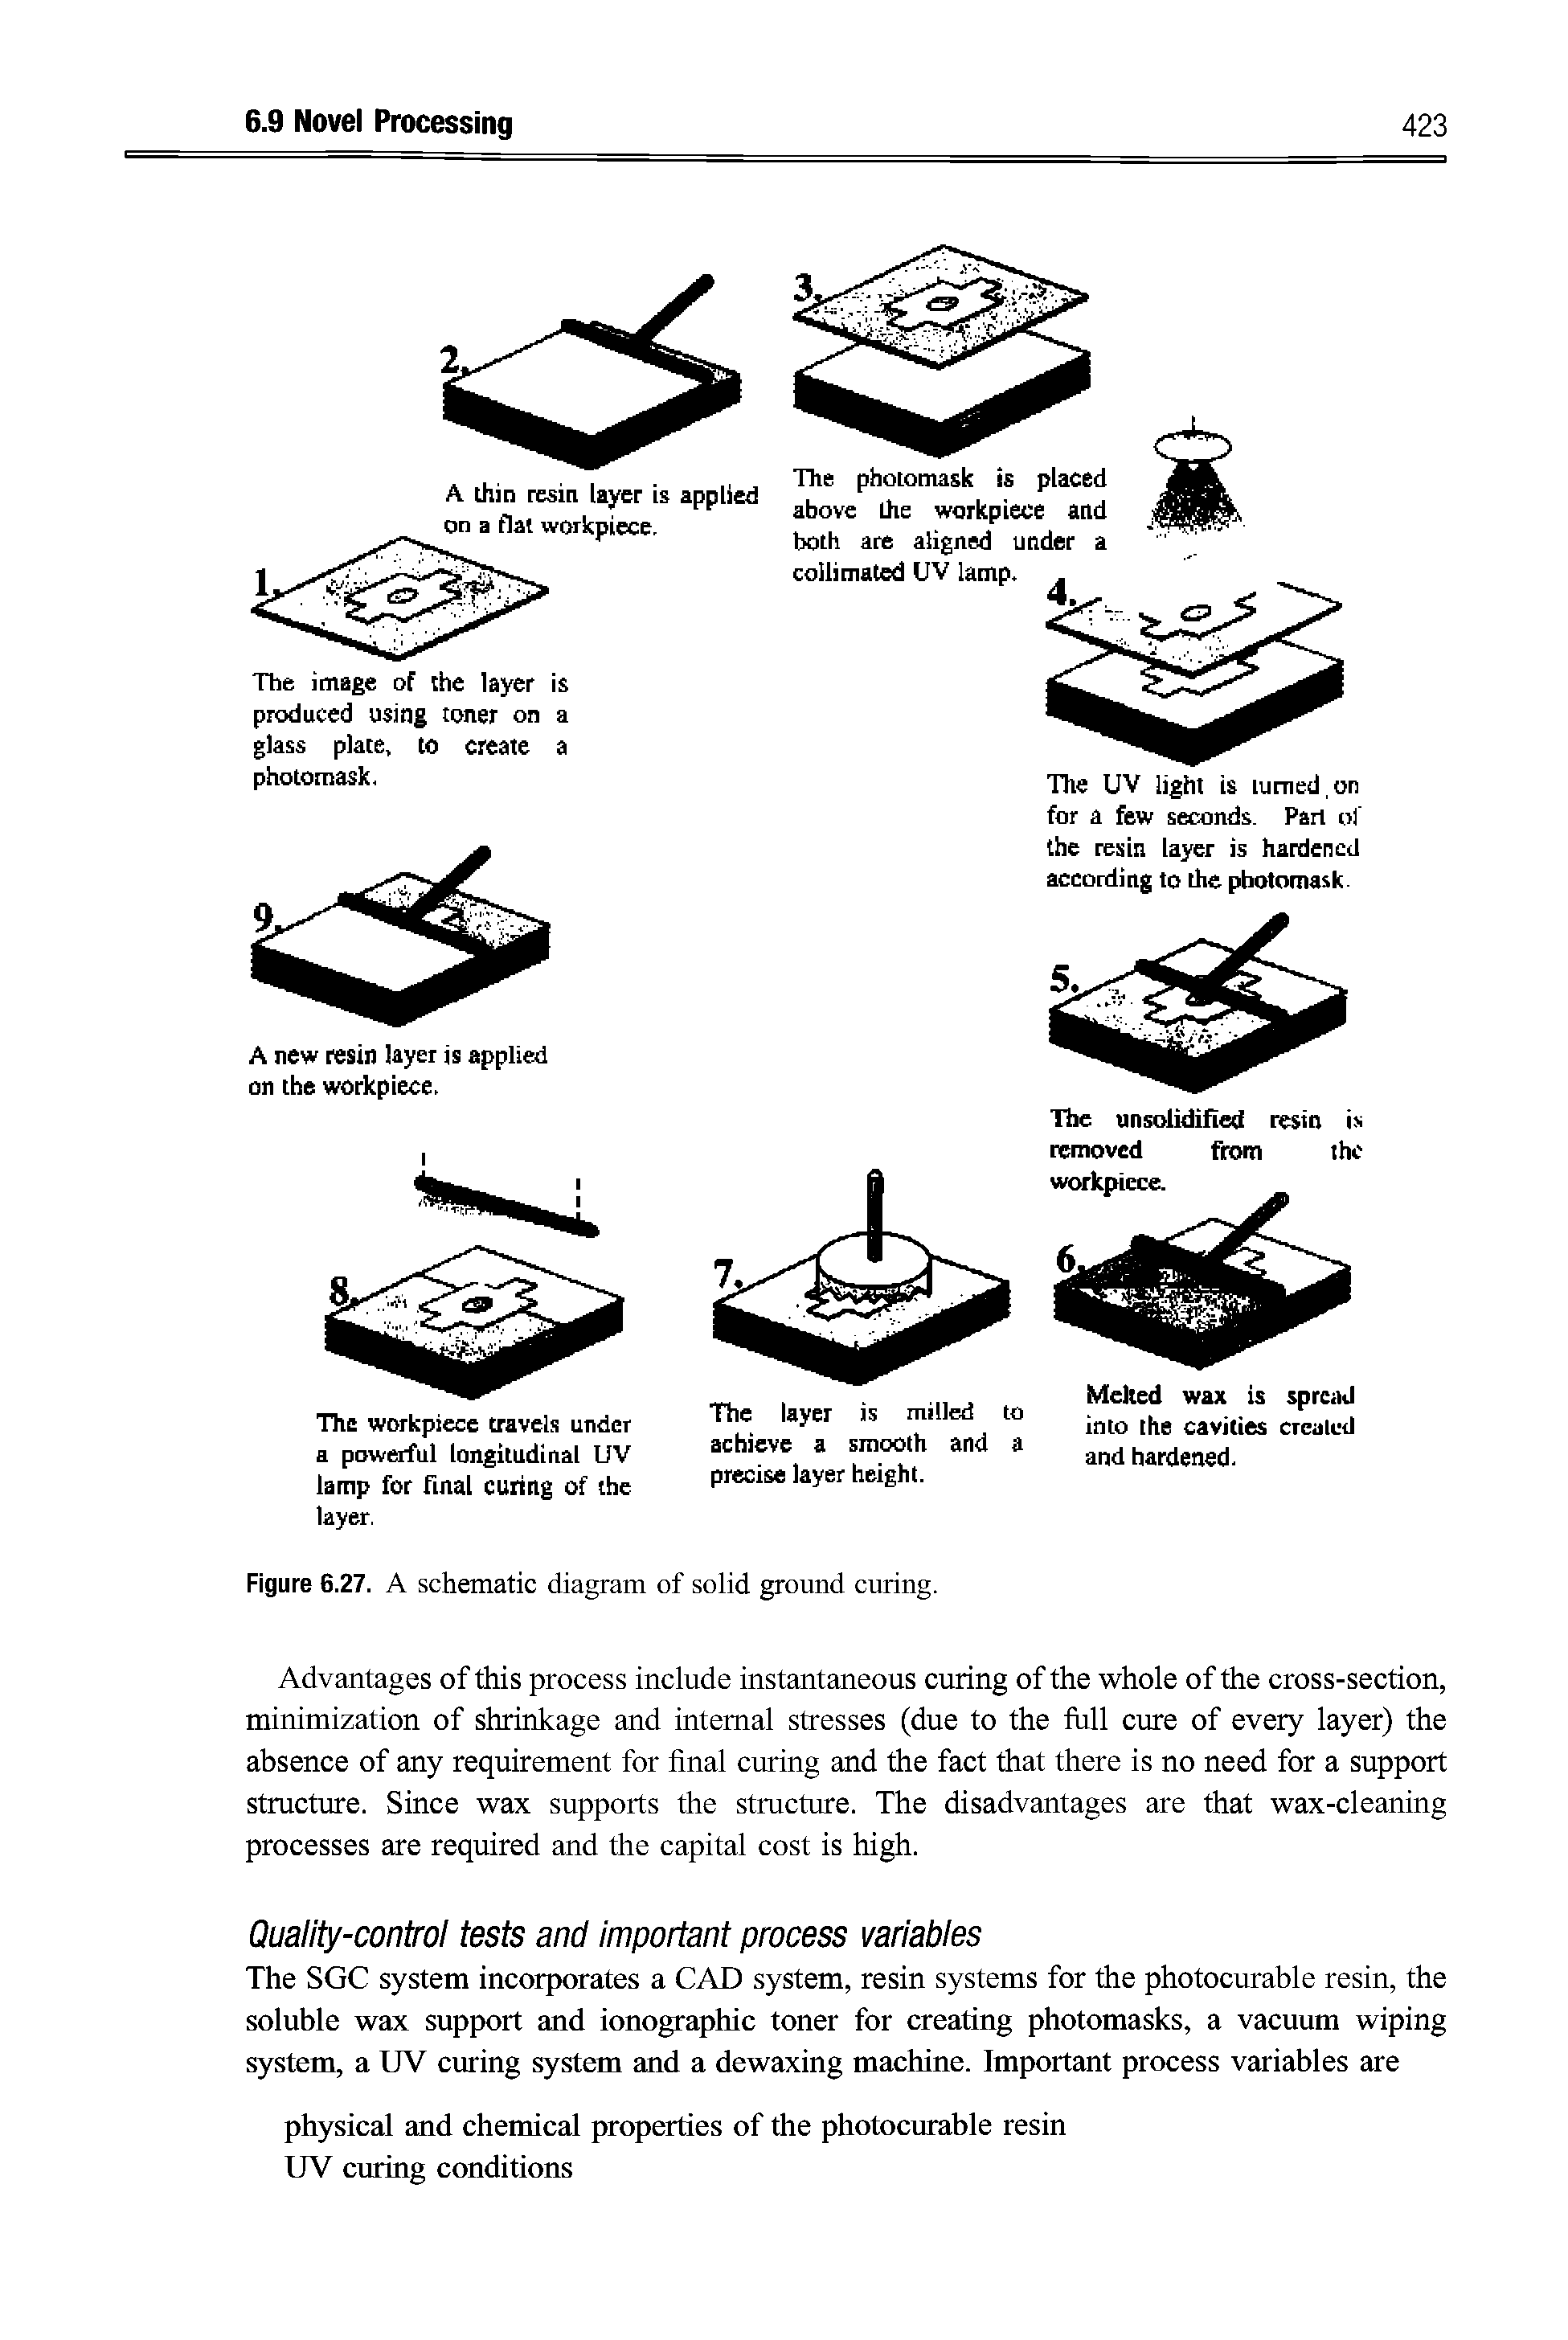 Figure 6.27. A schematic diagram of solid ground curing.